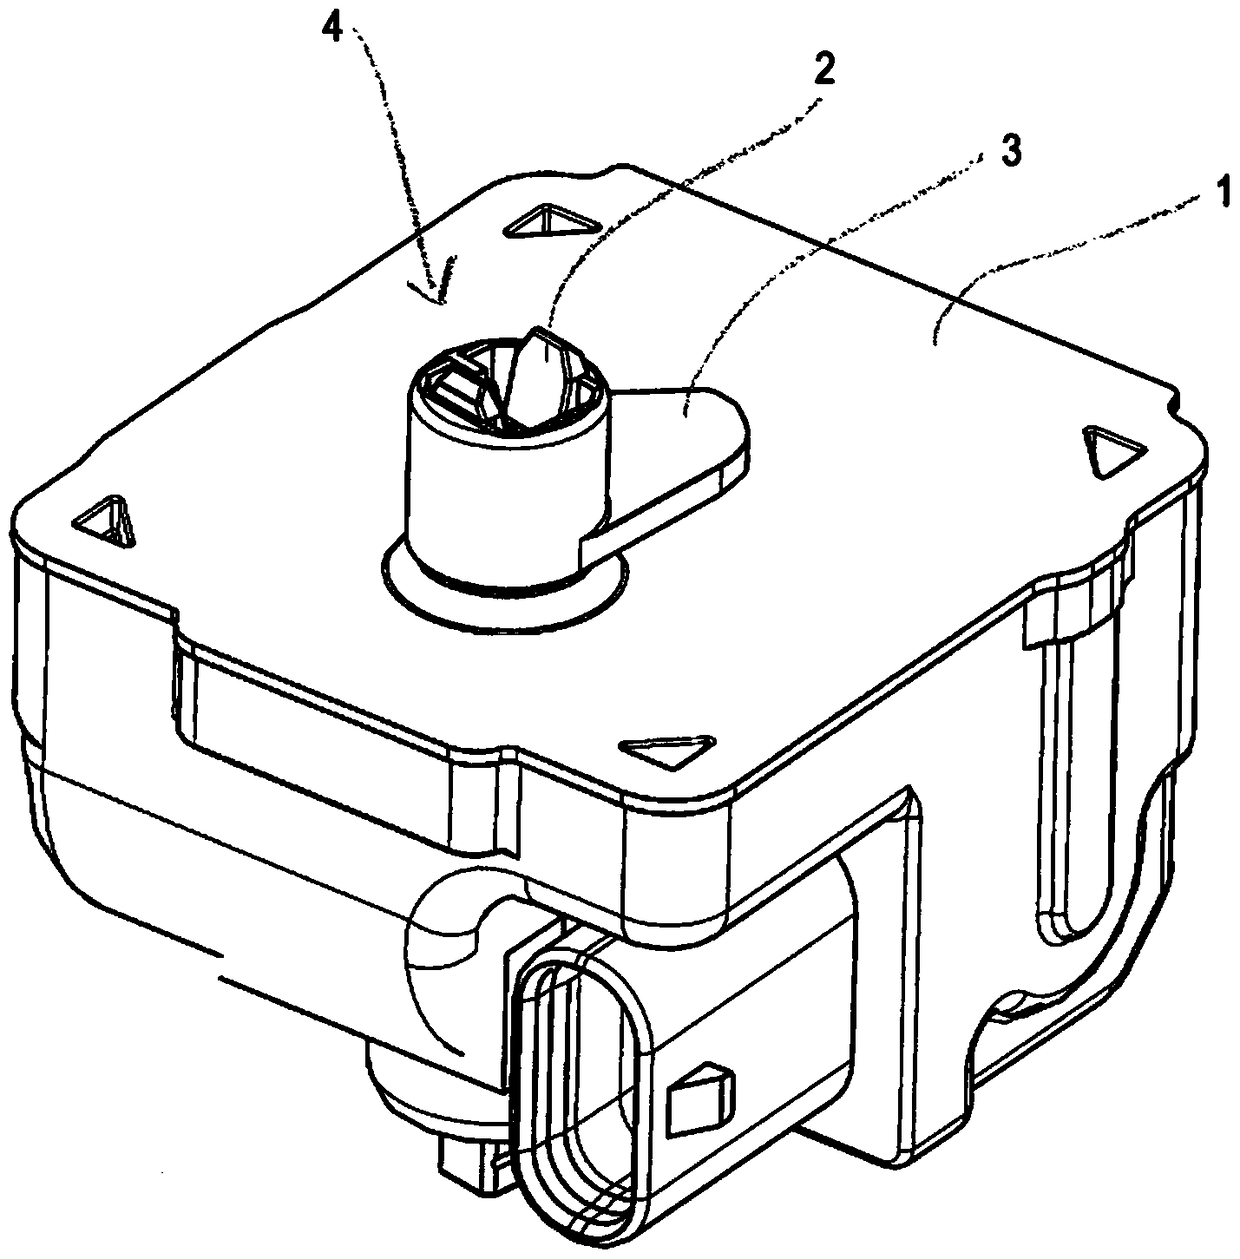 Locking device for plug-in connection